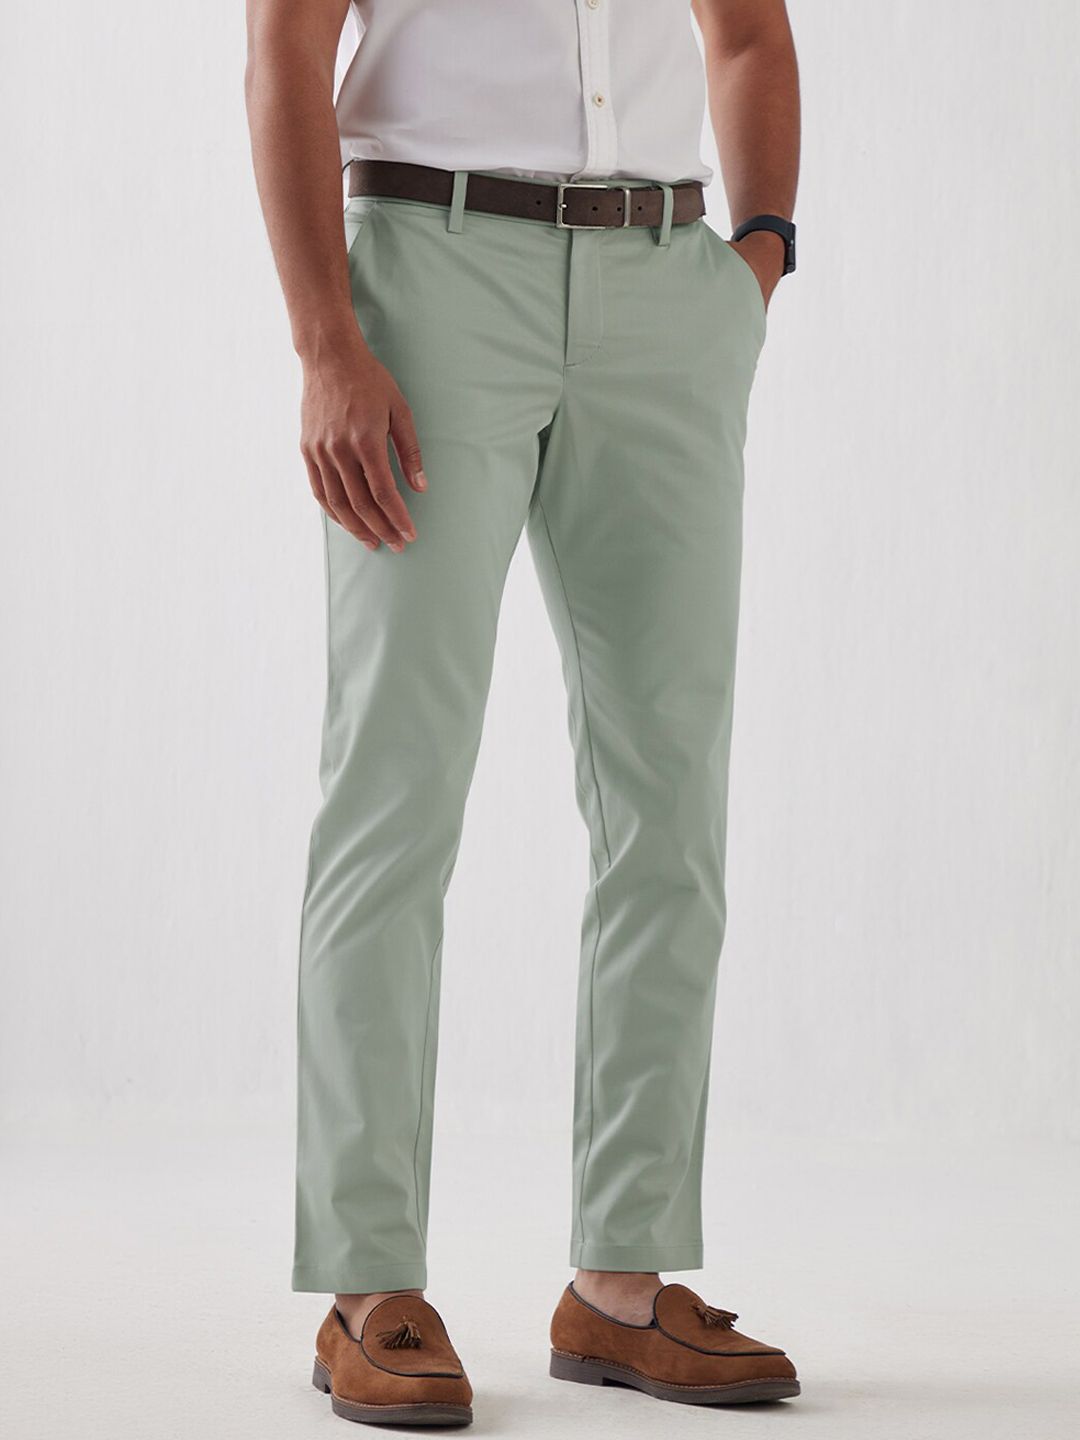 Mens Turquoise Green Solid Color Chinos